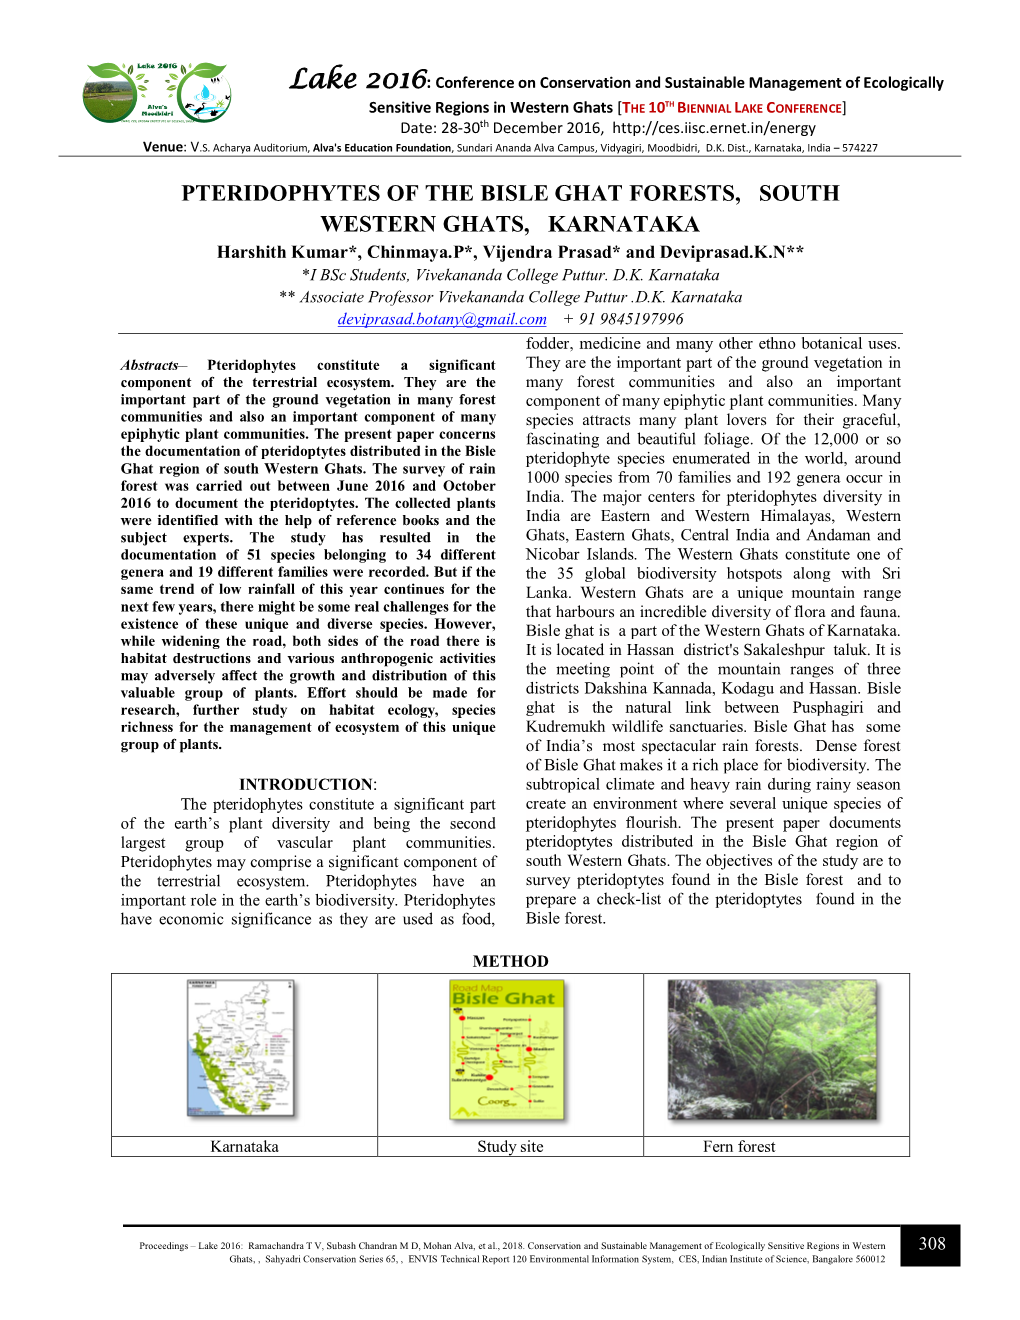 Pteridophytes of the Bisle Ghat Forests, South Western Ghats